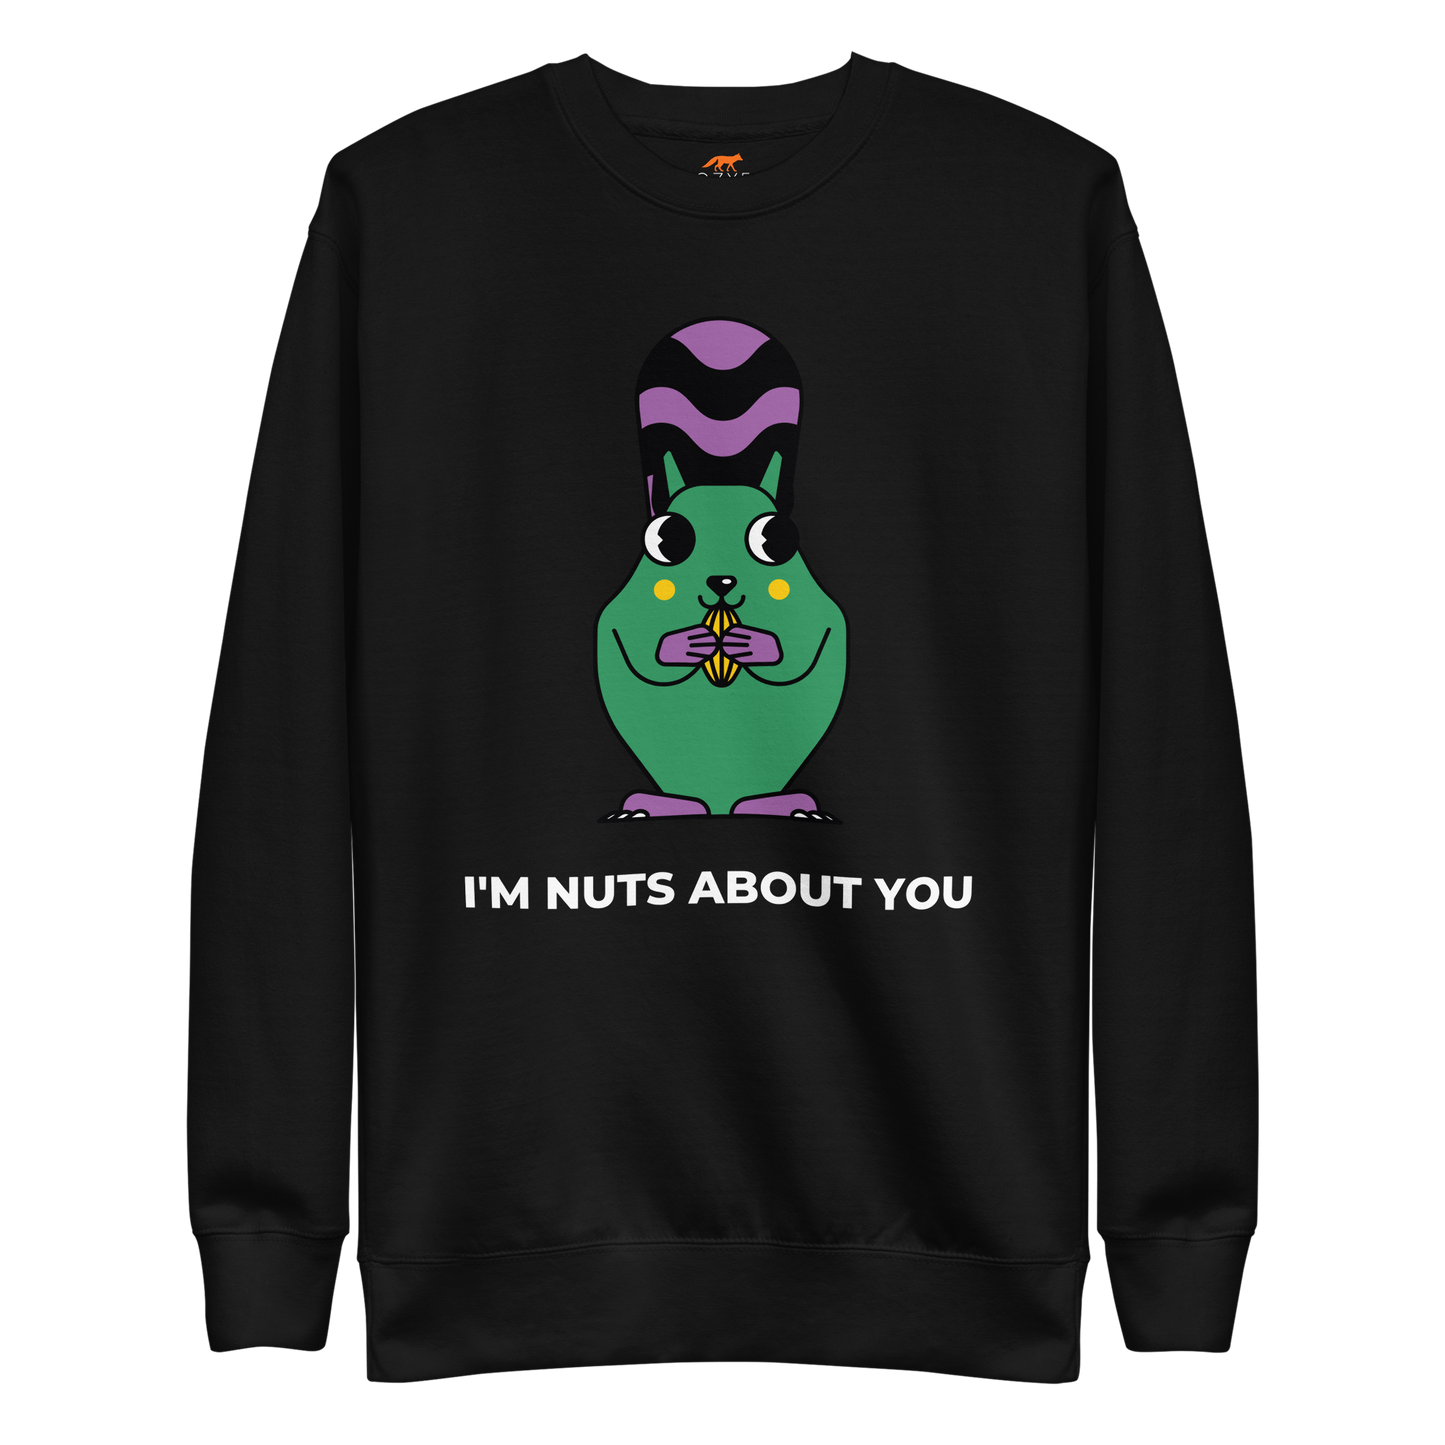 Black Premium Squirrel Sweatshirt featuring a hilarious I'm Nuts About You graphic on the chest - Funny Graphic Squirrel Sweatshirts - Boozy Fox